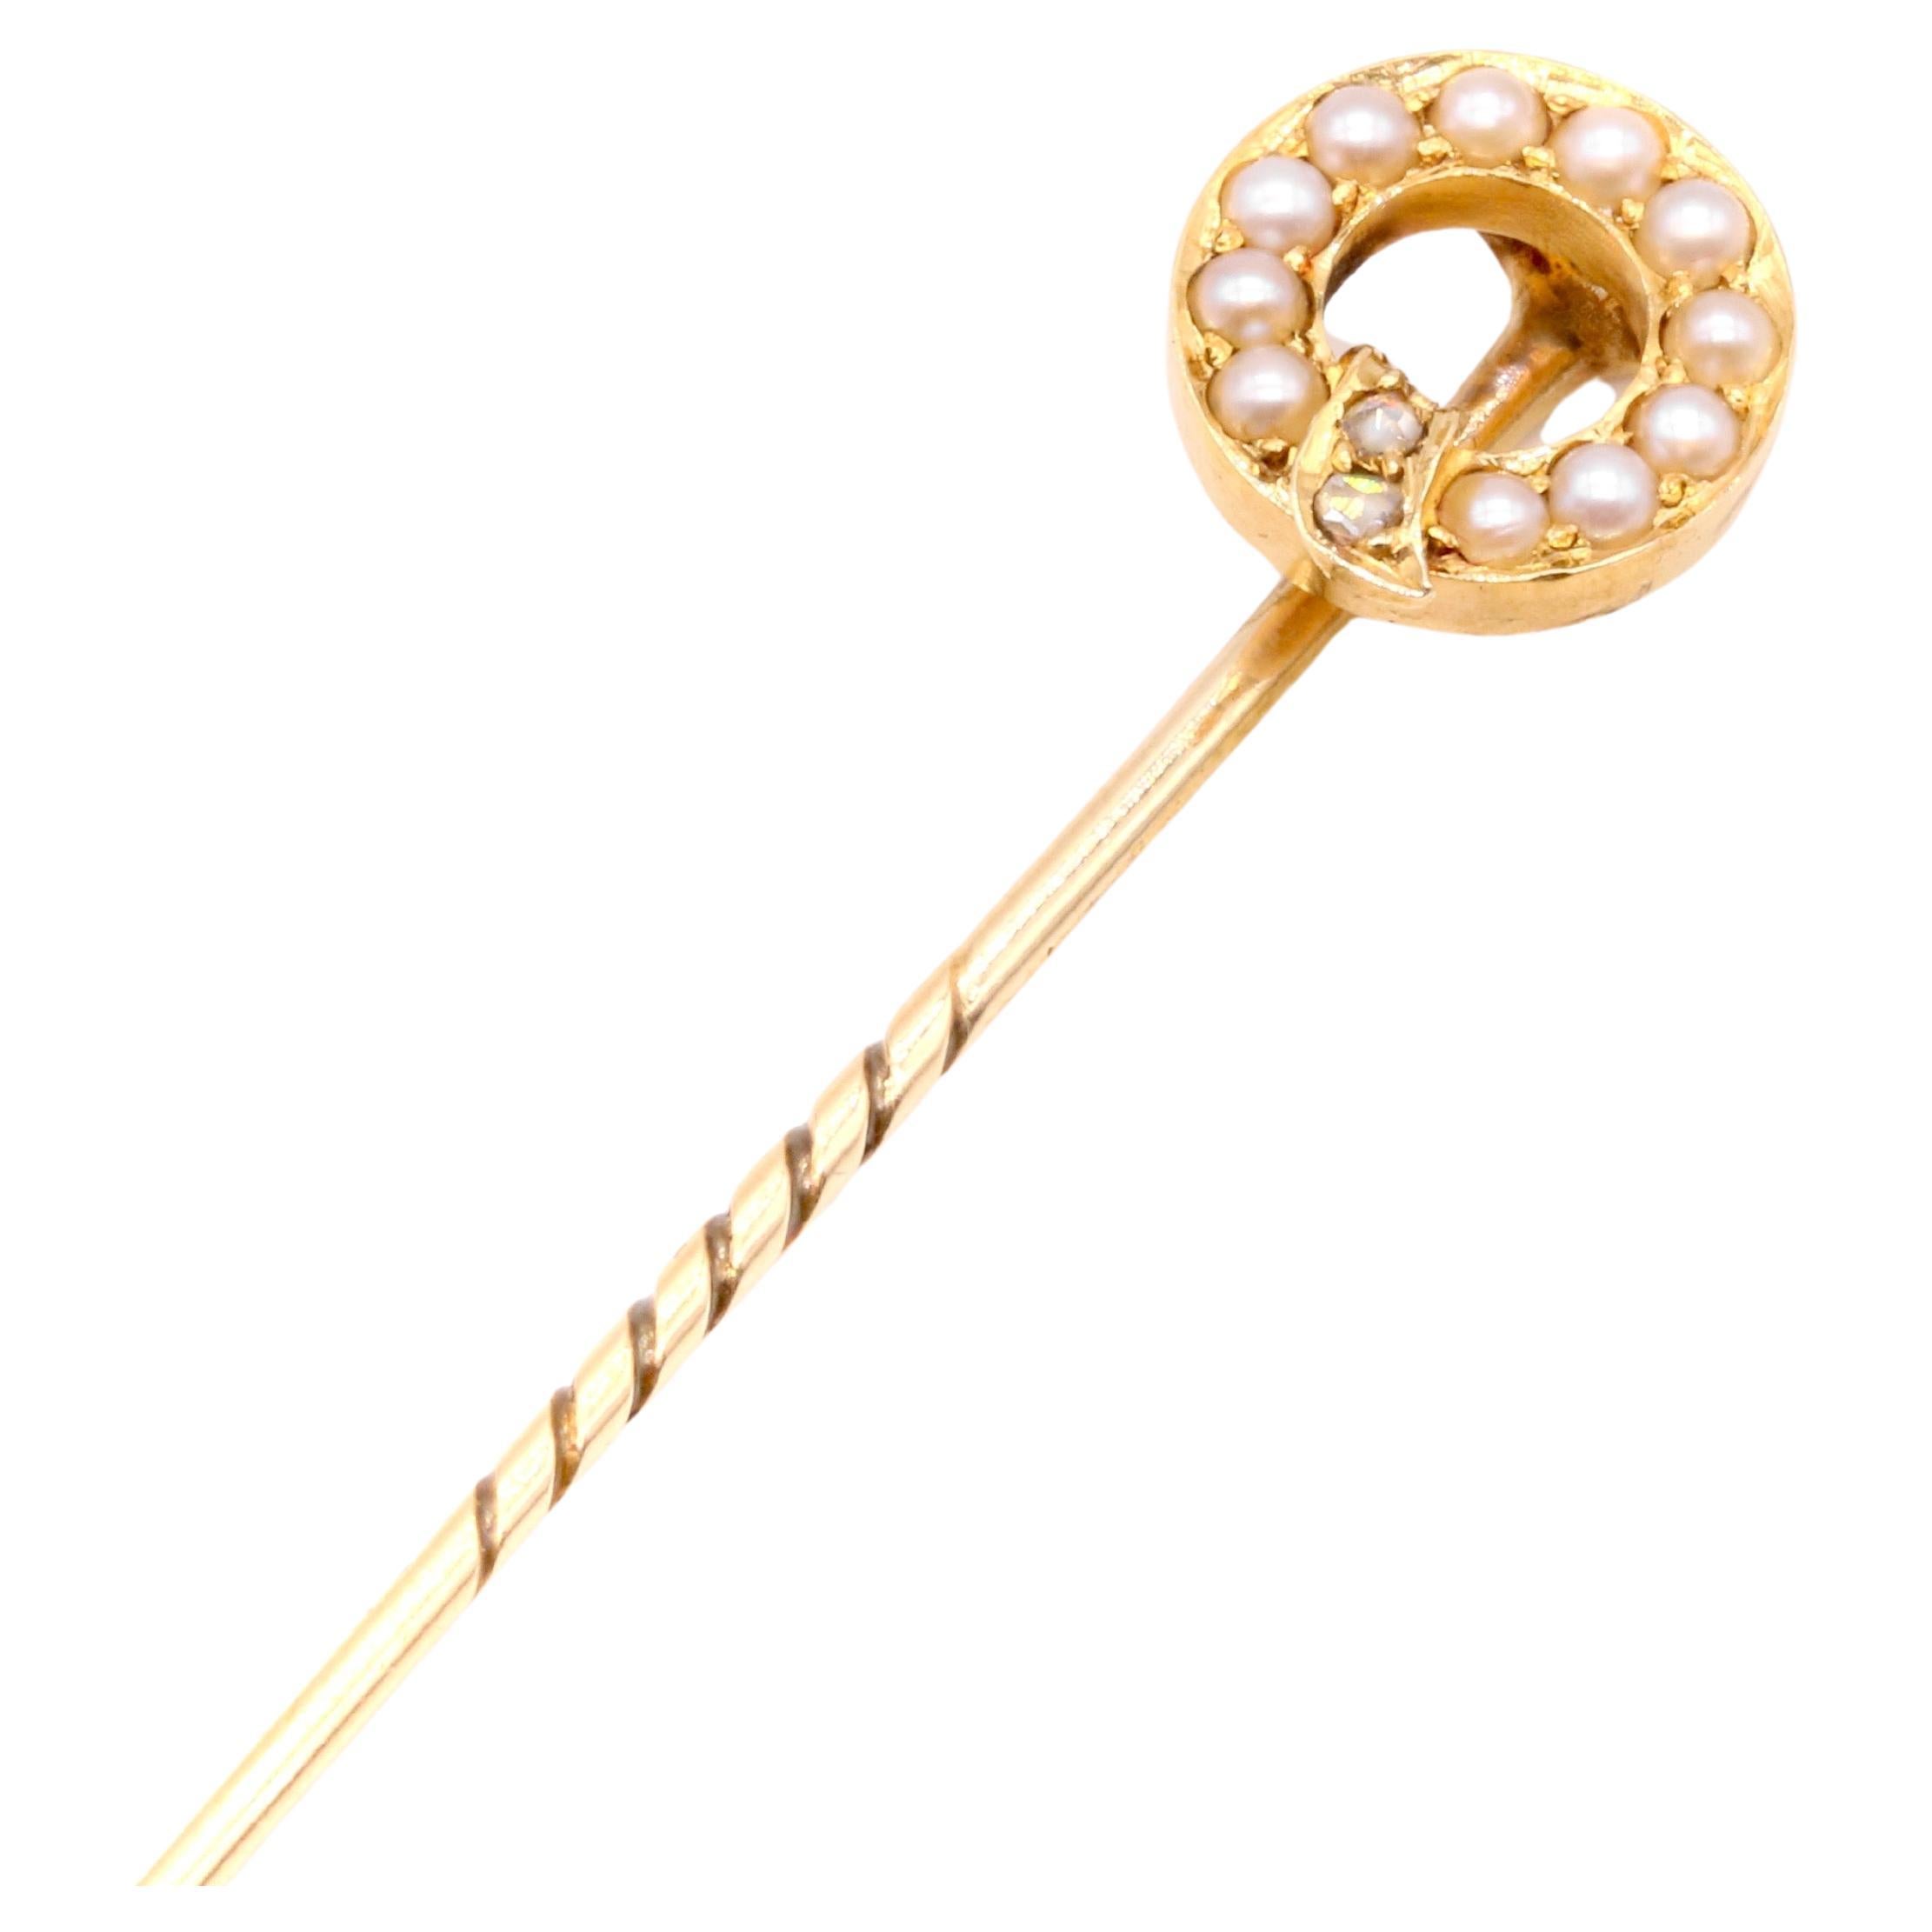 Antique Victorian 15K Yellow Gold Pearl and Diamond Garter Stick Pin